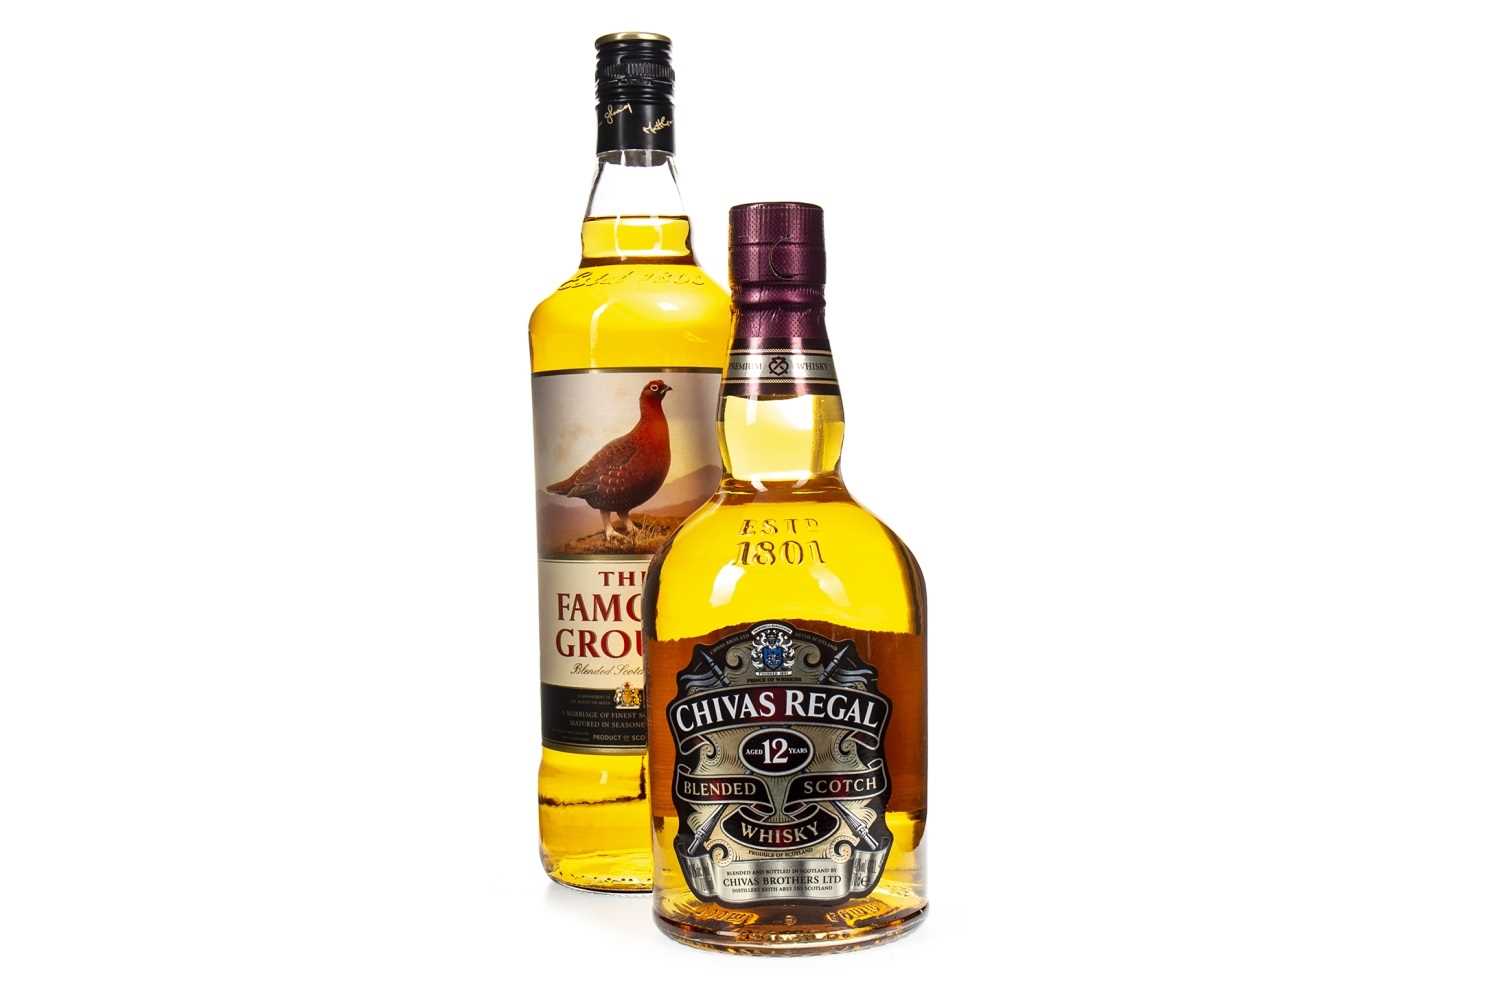 Lot 442 - CHIVAS REGAL AGED 12 YEARS AND FAMOUS GROUSE ONE LITRE